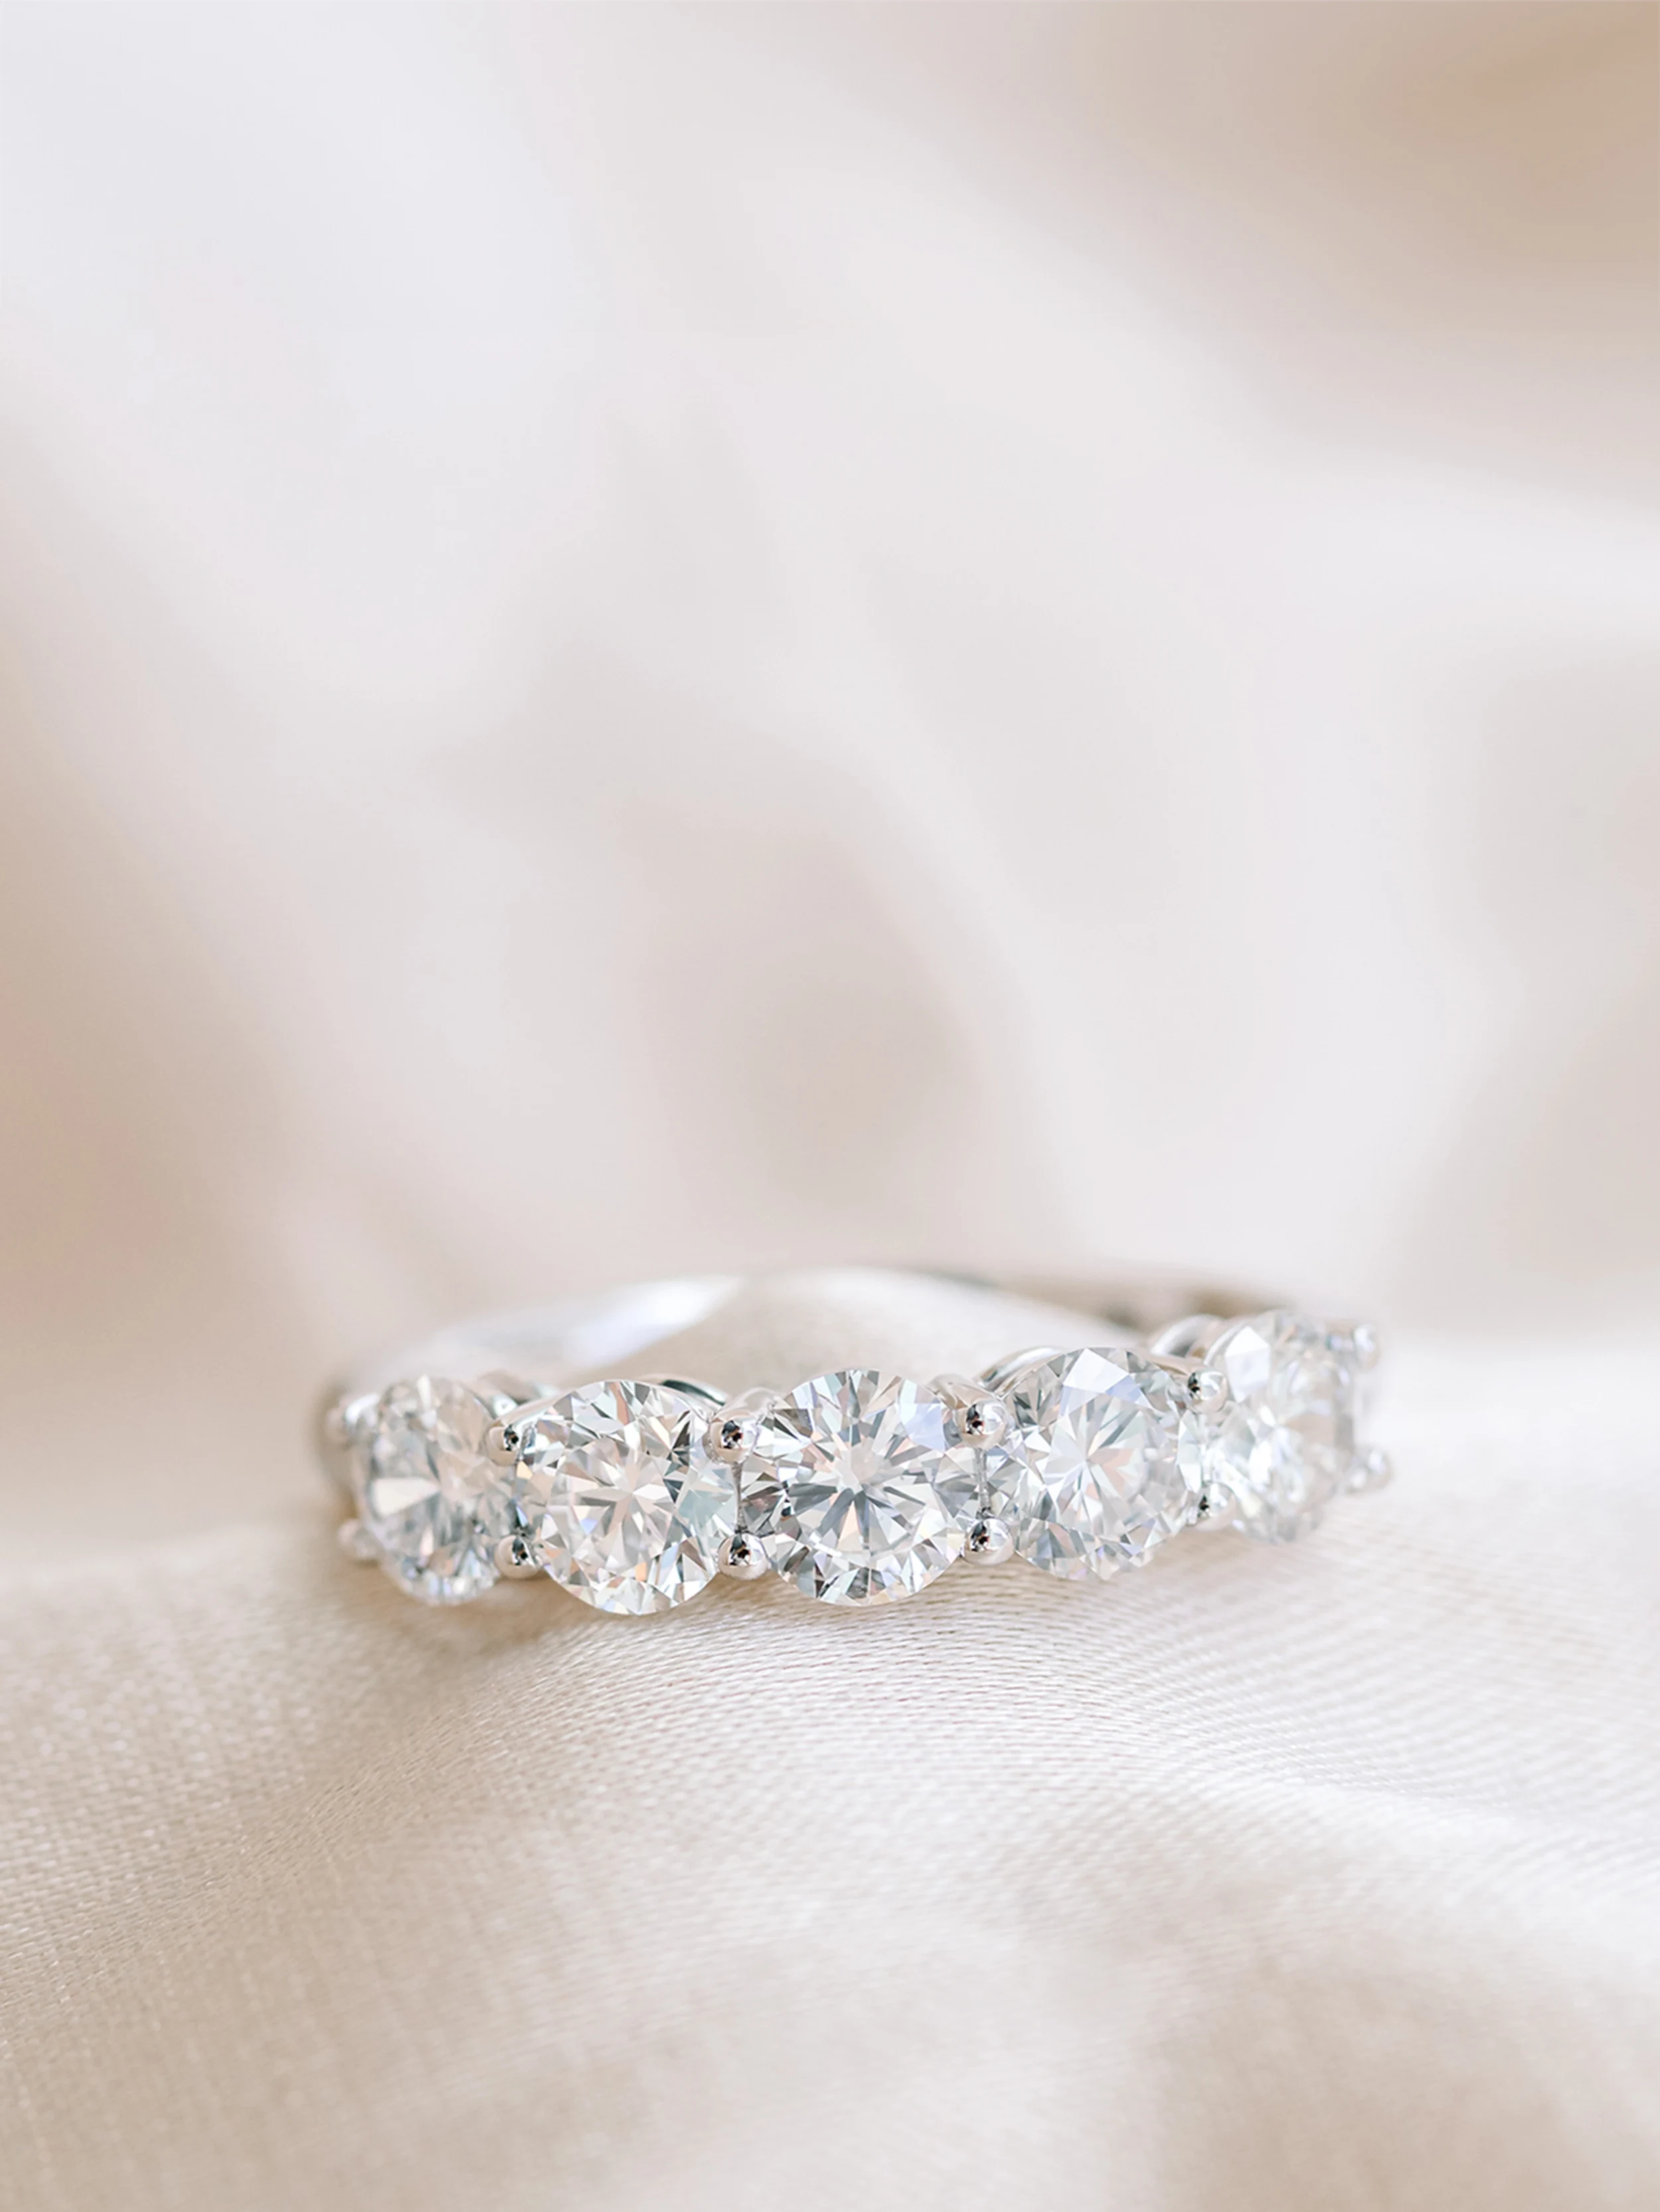 French U Five Stone featuring High Quality Round Diamonds (Profile View)